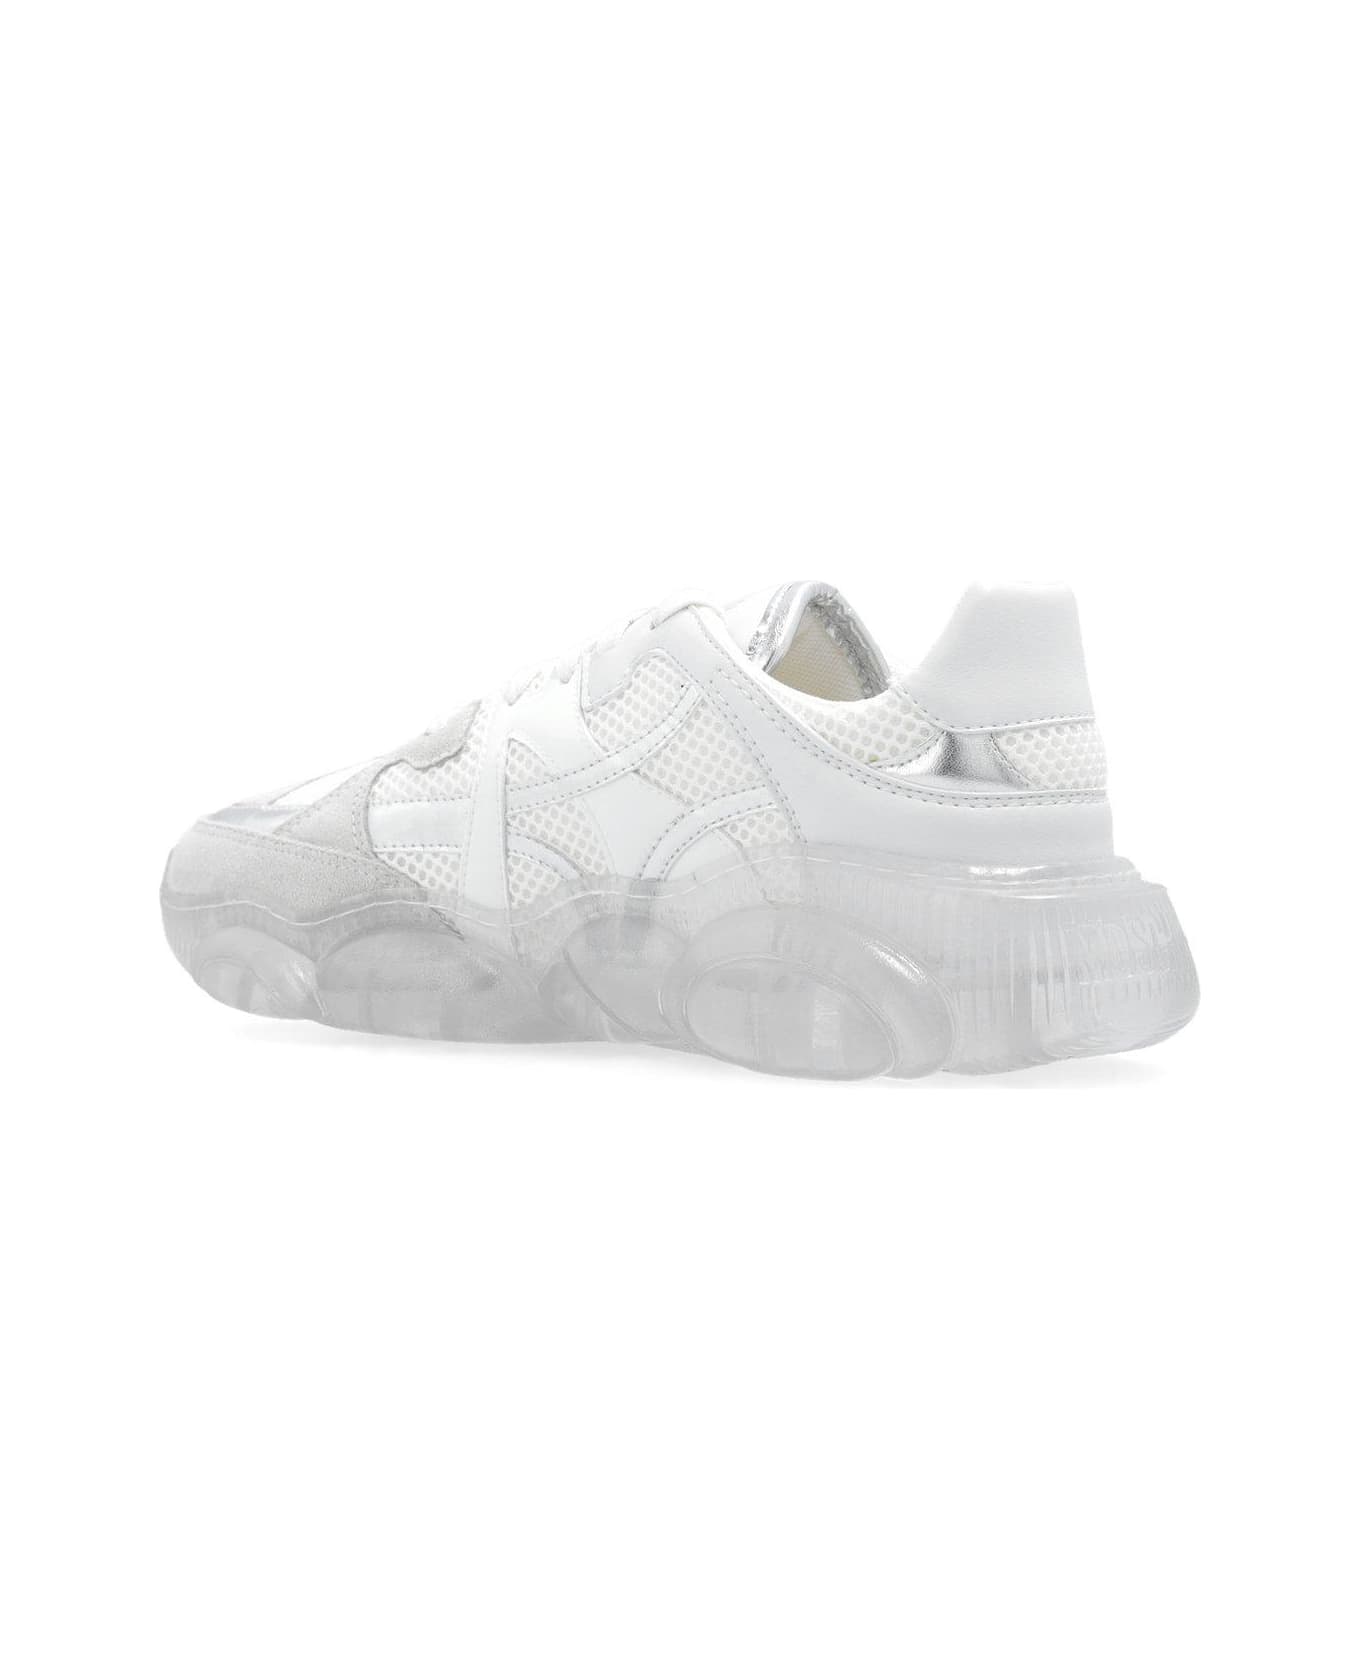 Moschino Round-toe Chunky Lace-up Sneakers - WHITE スニーカー